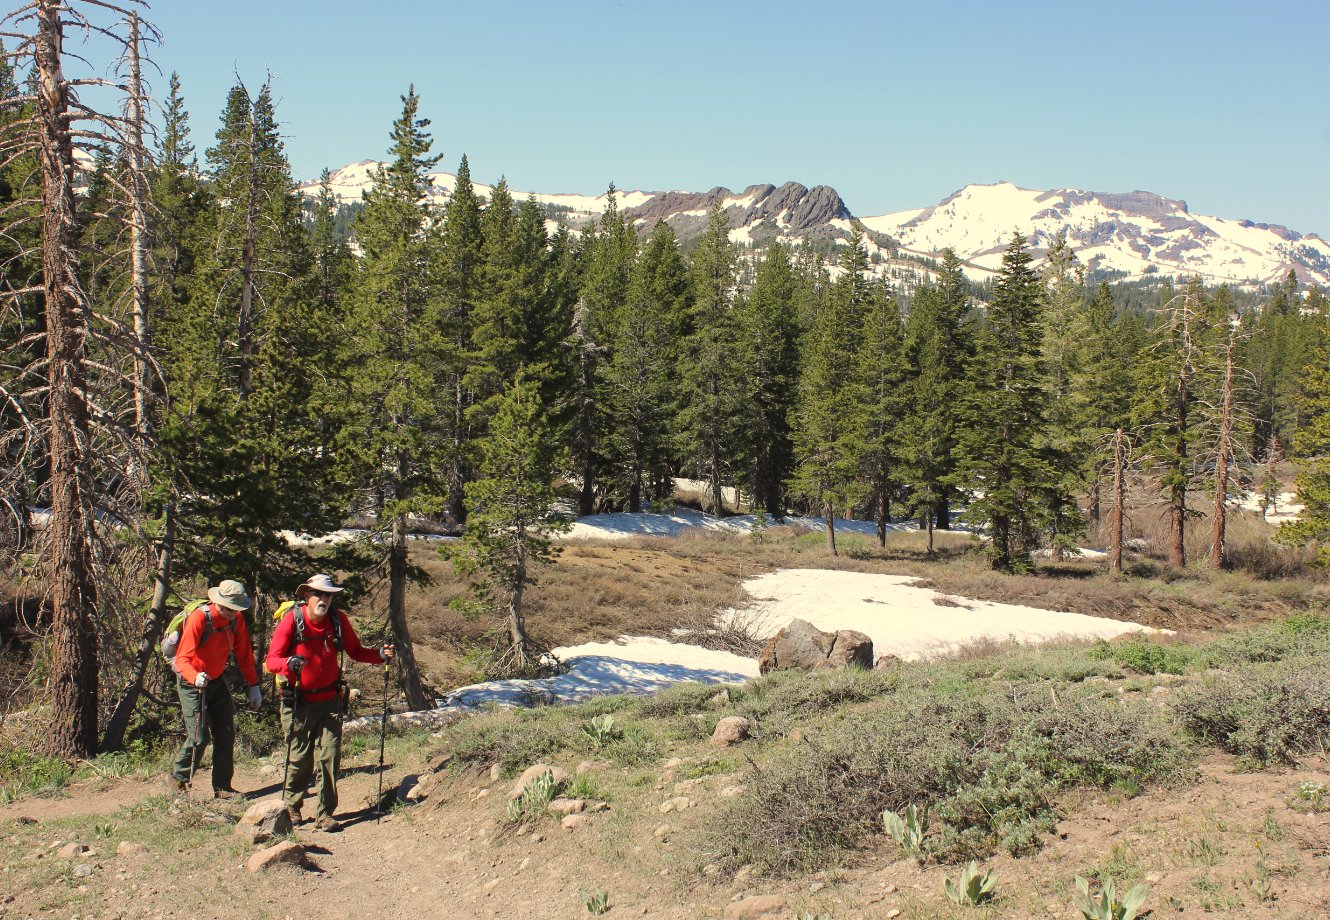 Heading up the PCT